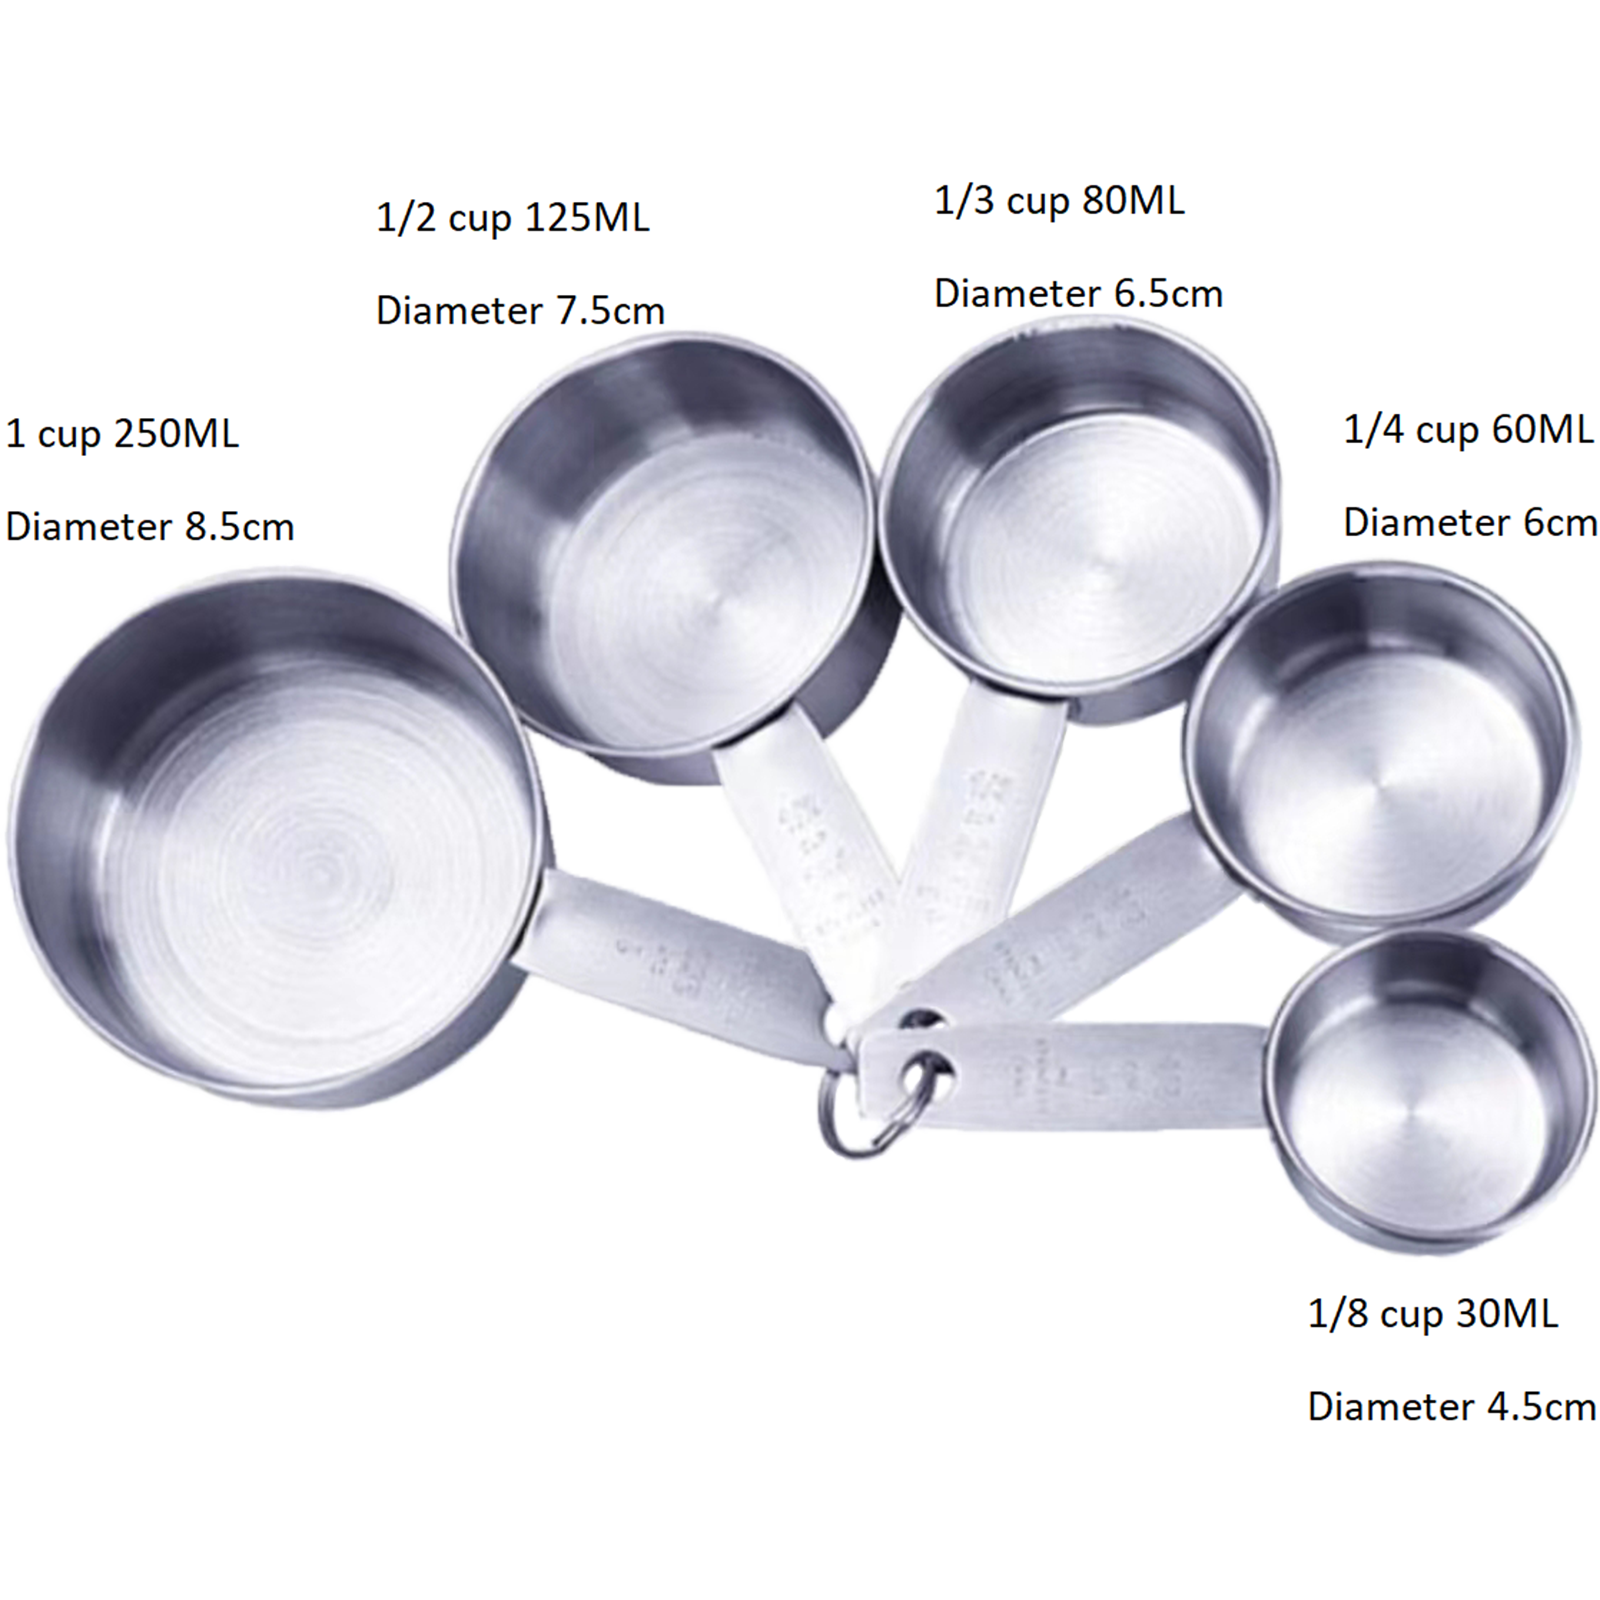  Accmor 11 Piece Stainless Steel Measuring Spoons Cups